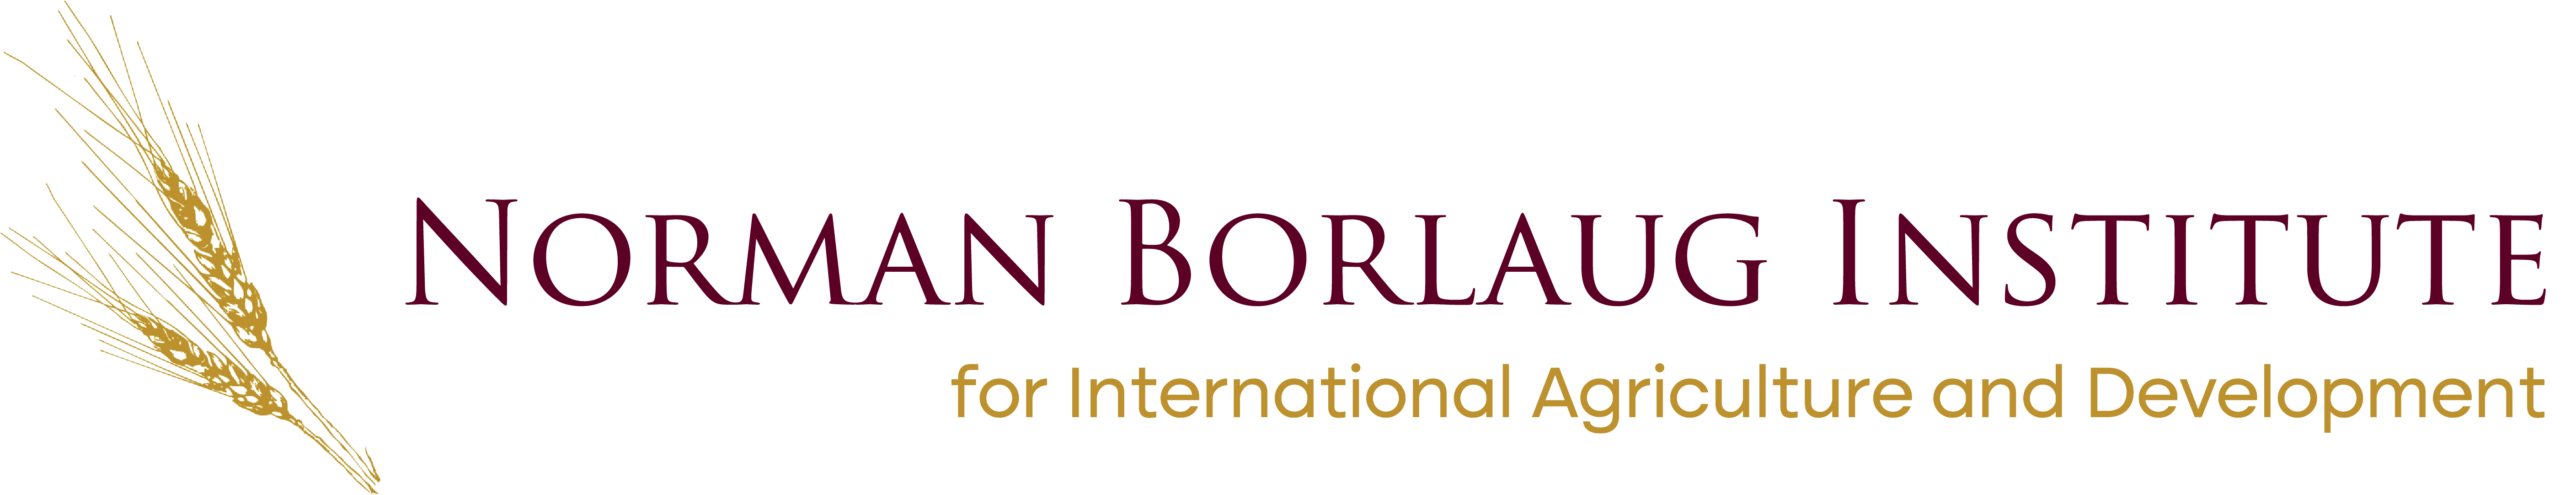 The Borlaug Institute for International Agriculture and Development